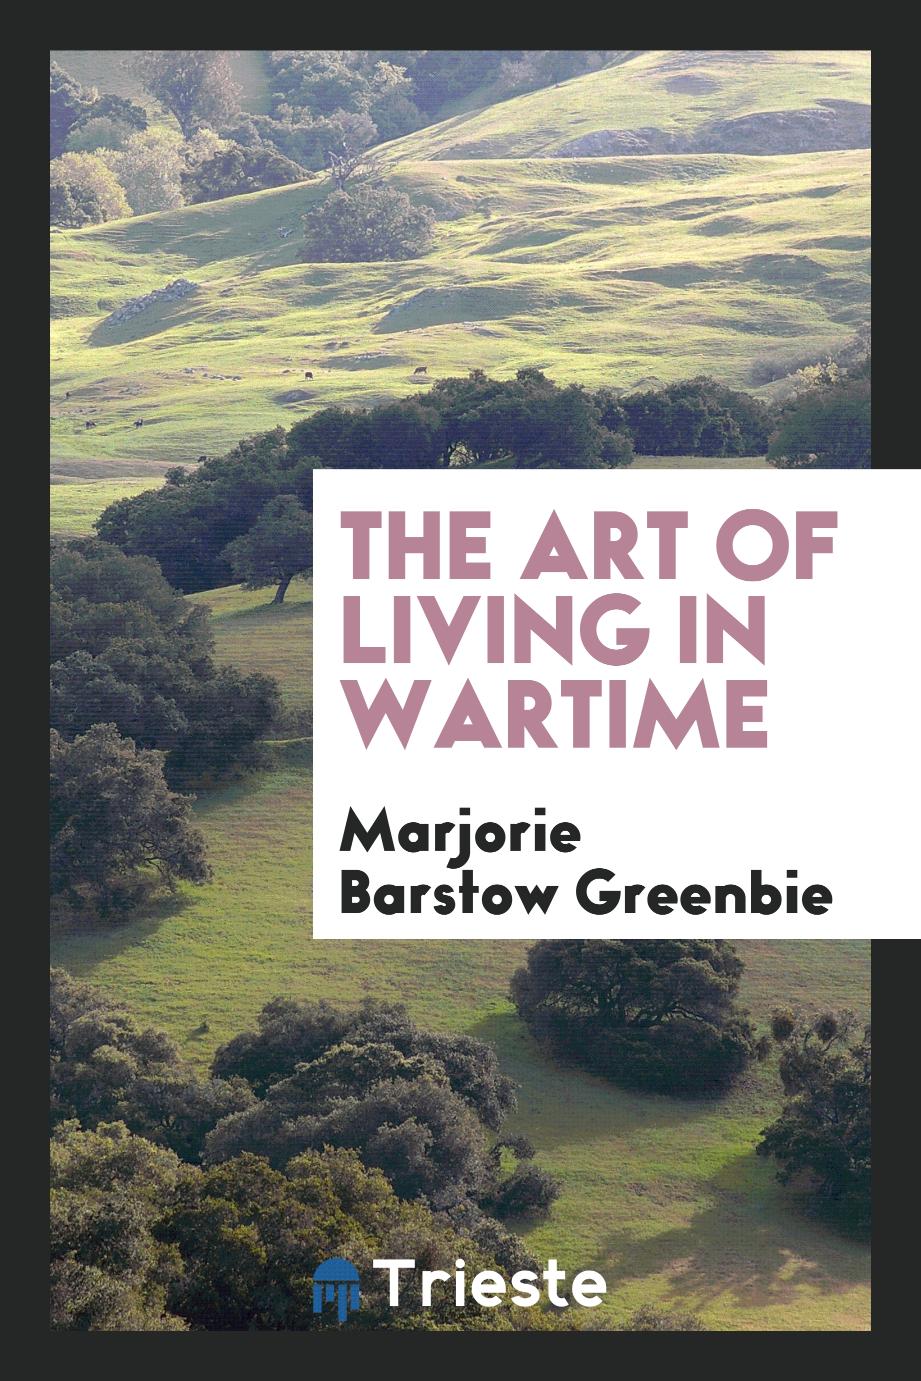 The art of living in wartime